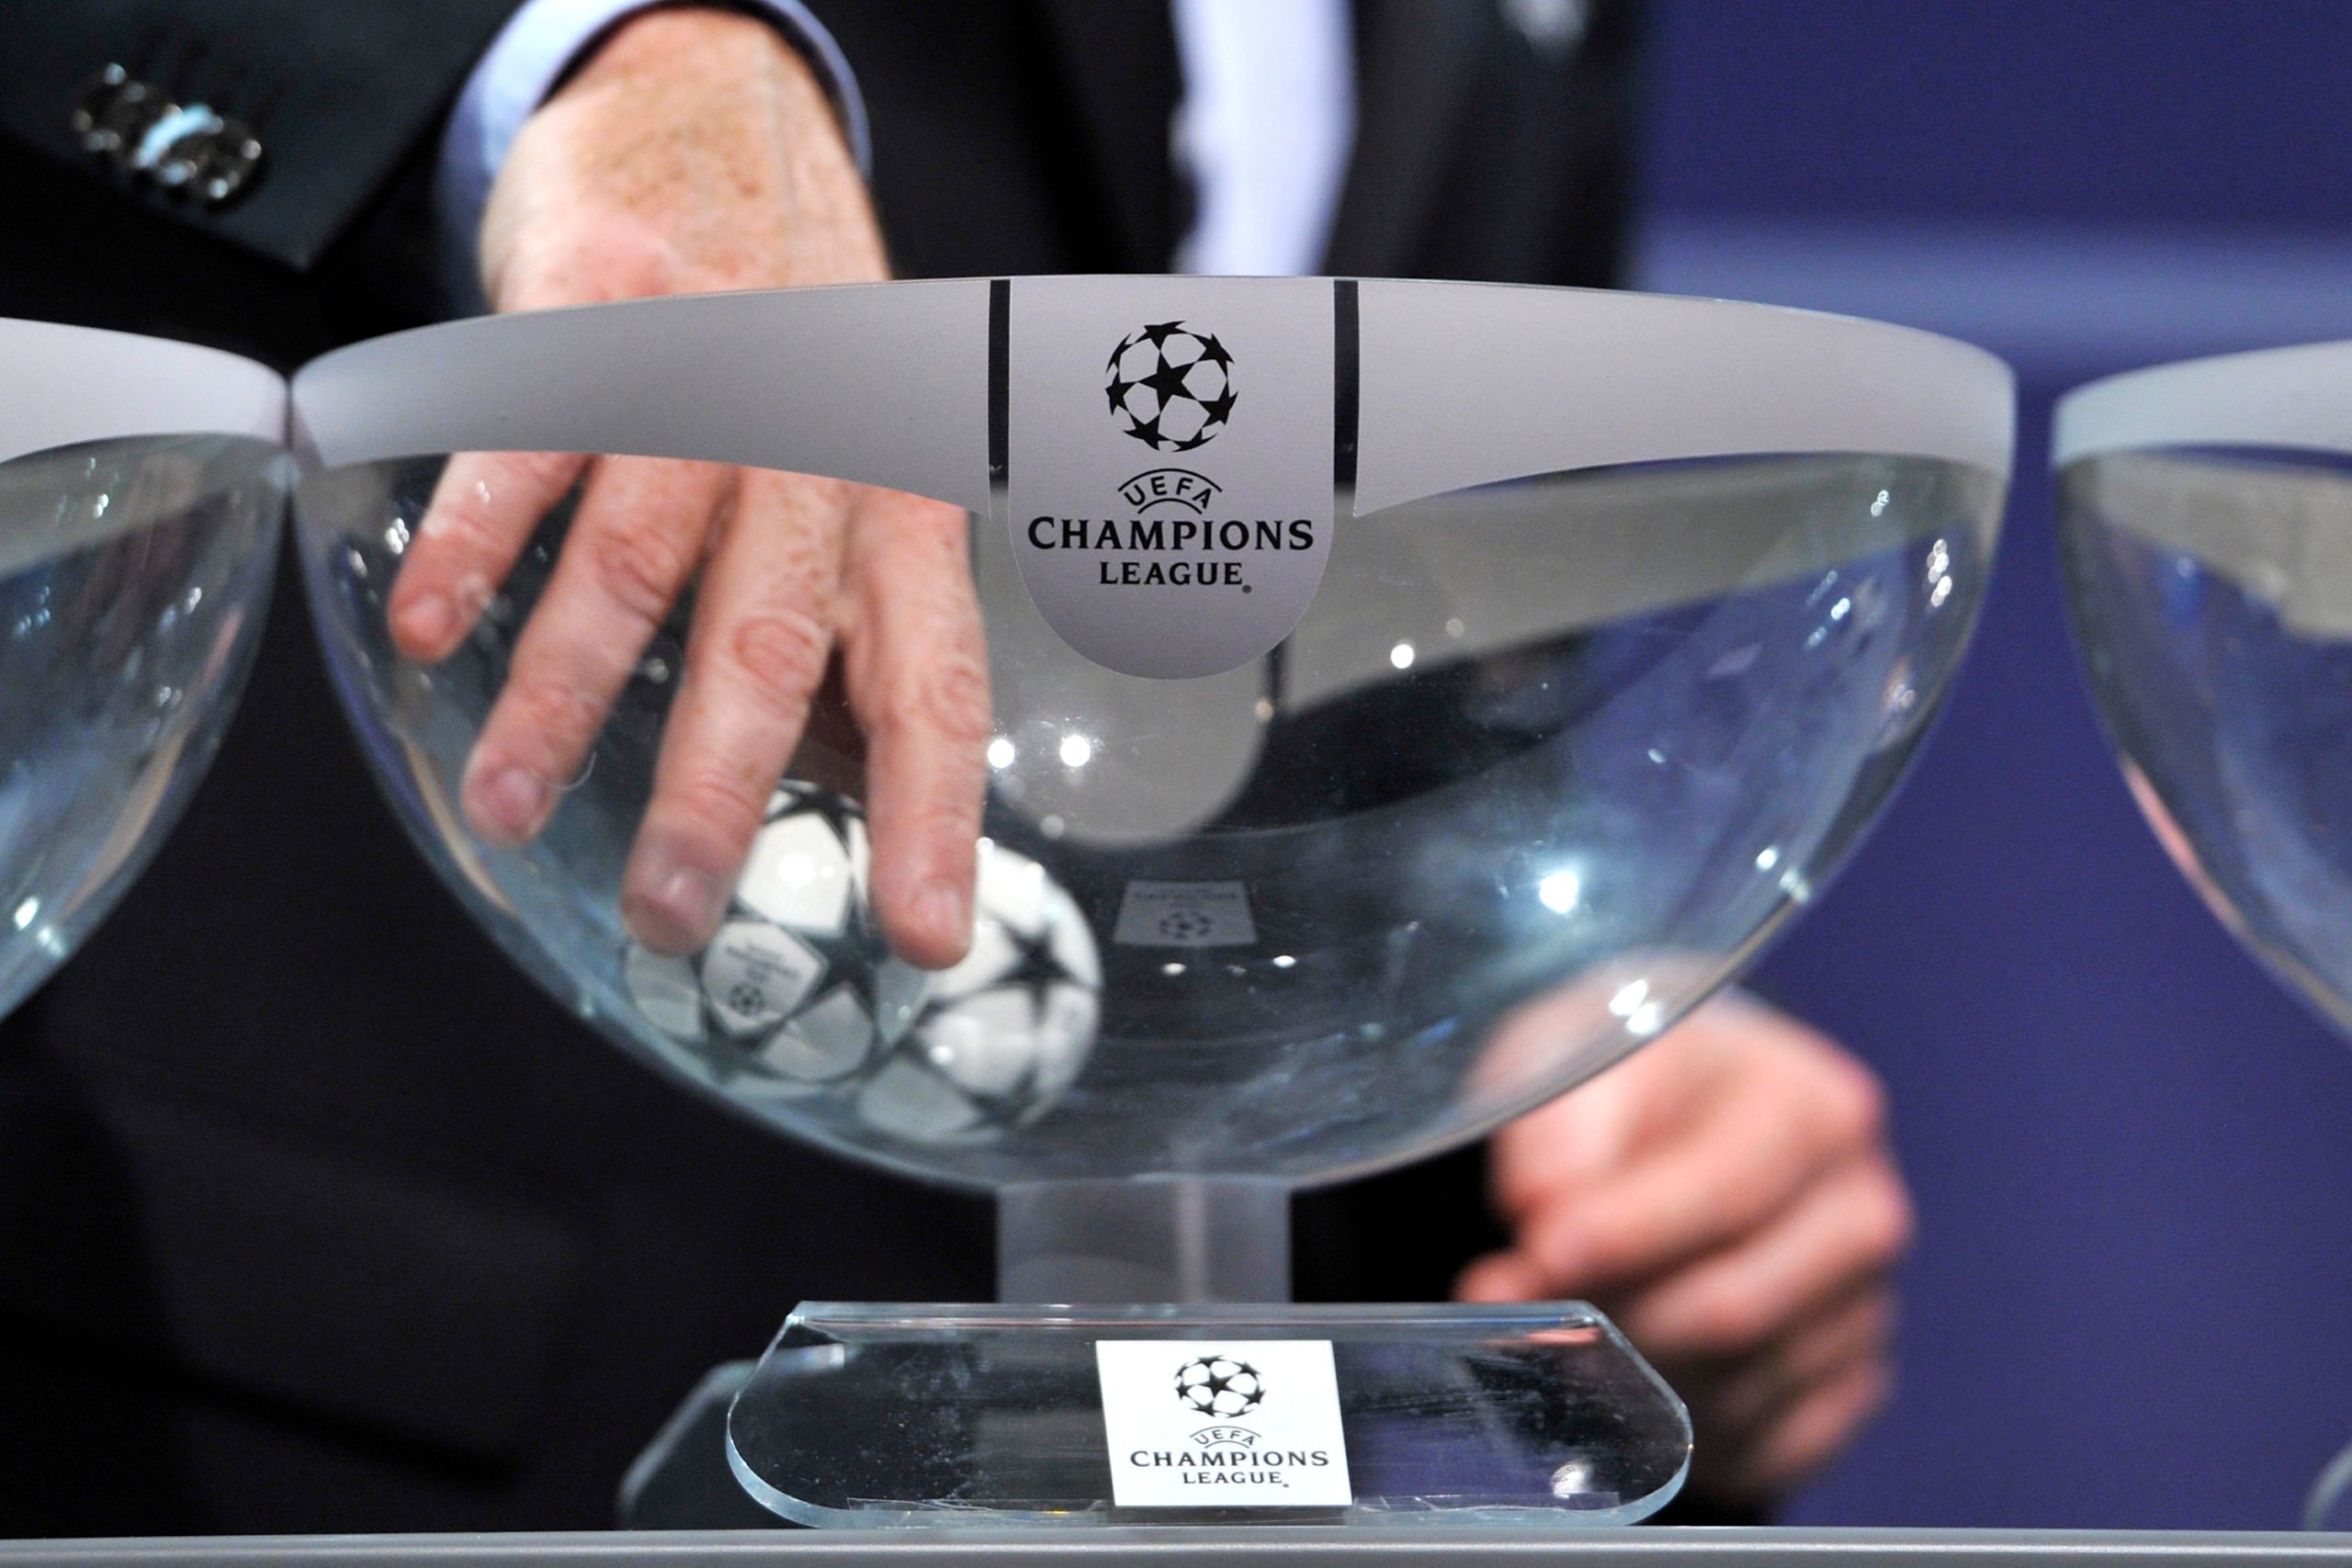 The Champions League groups will one day involve Celtic again